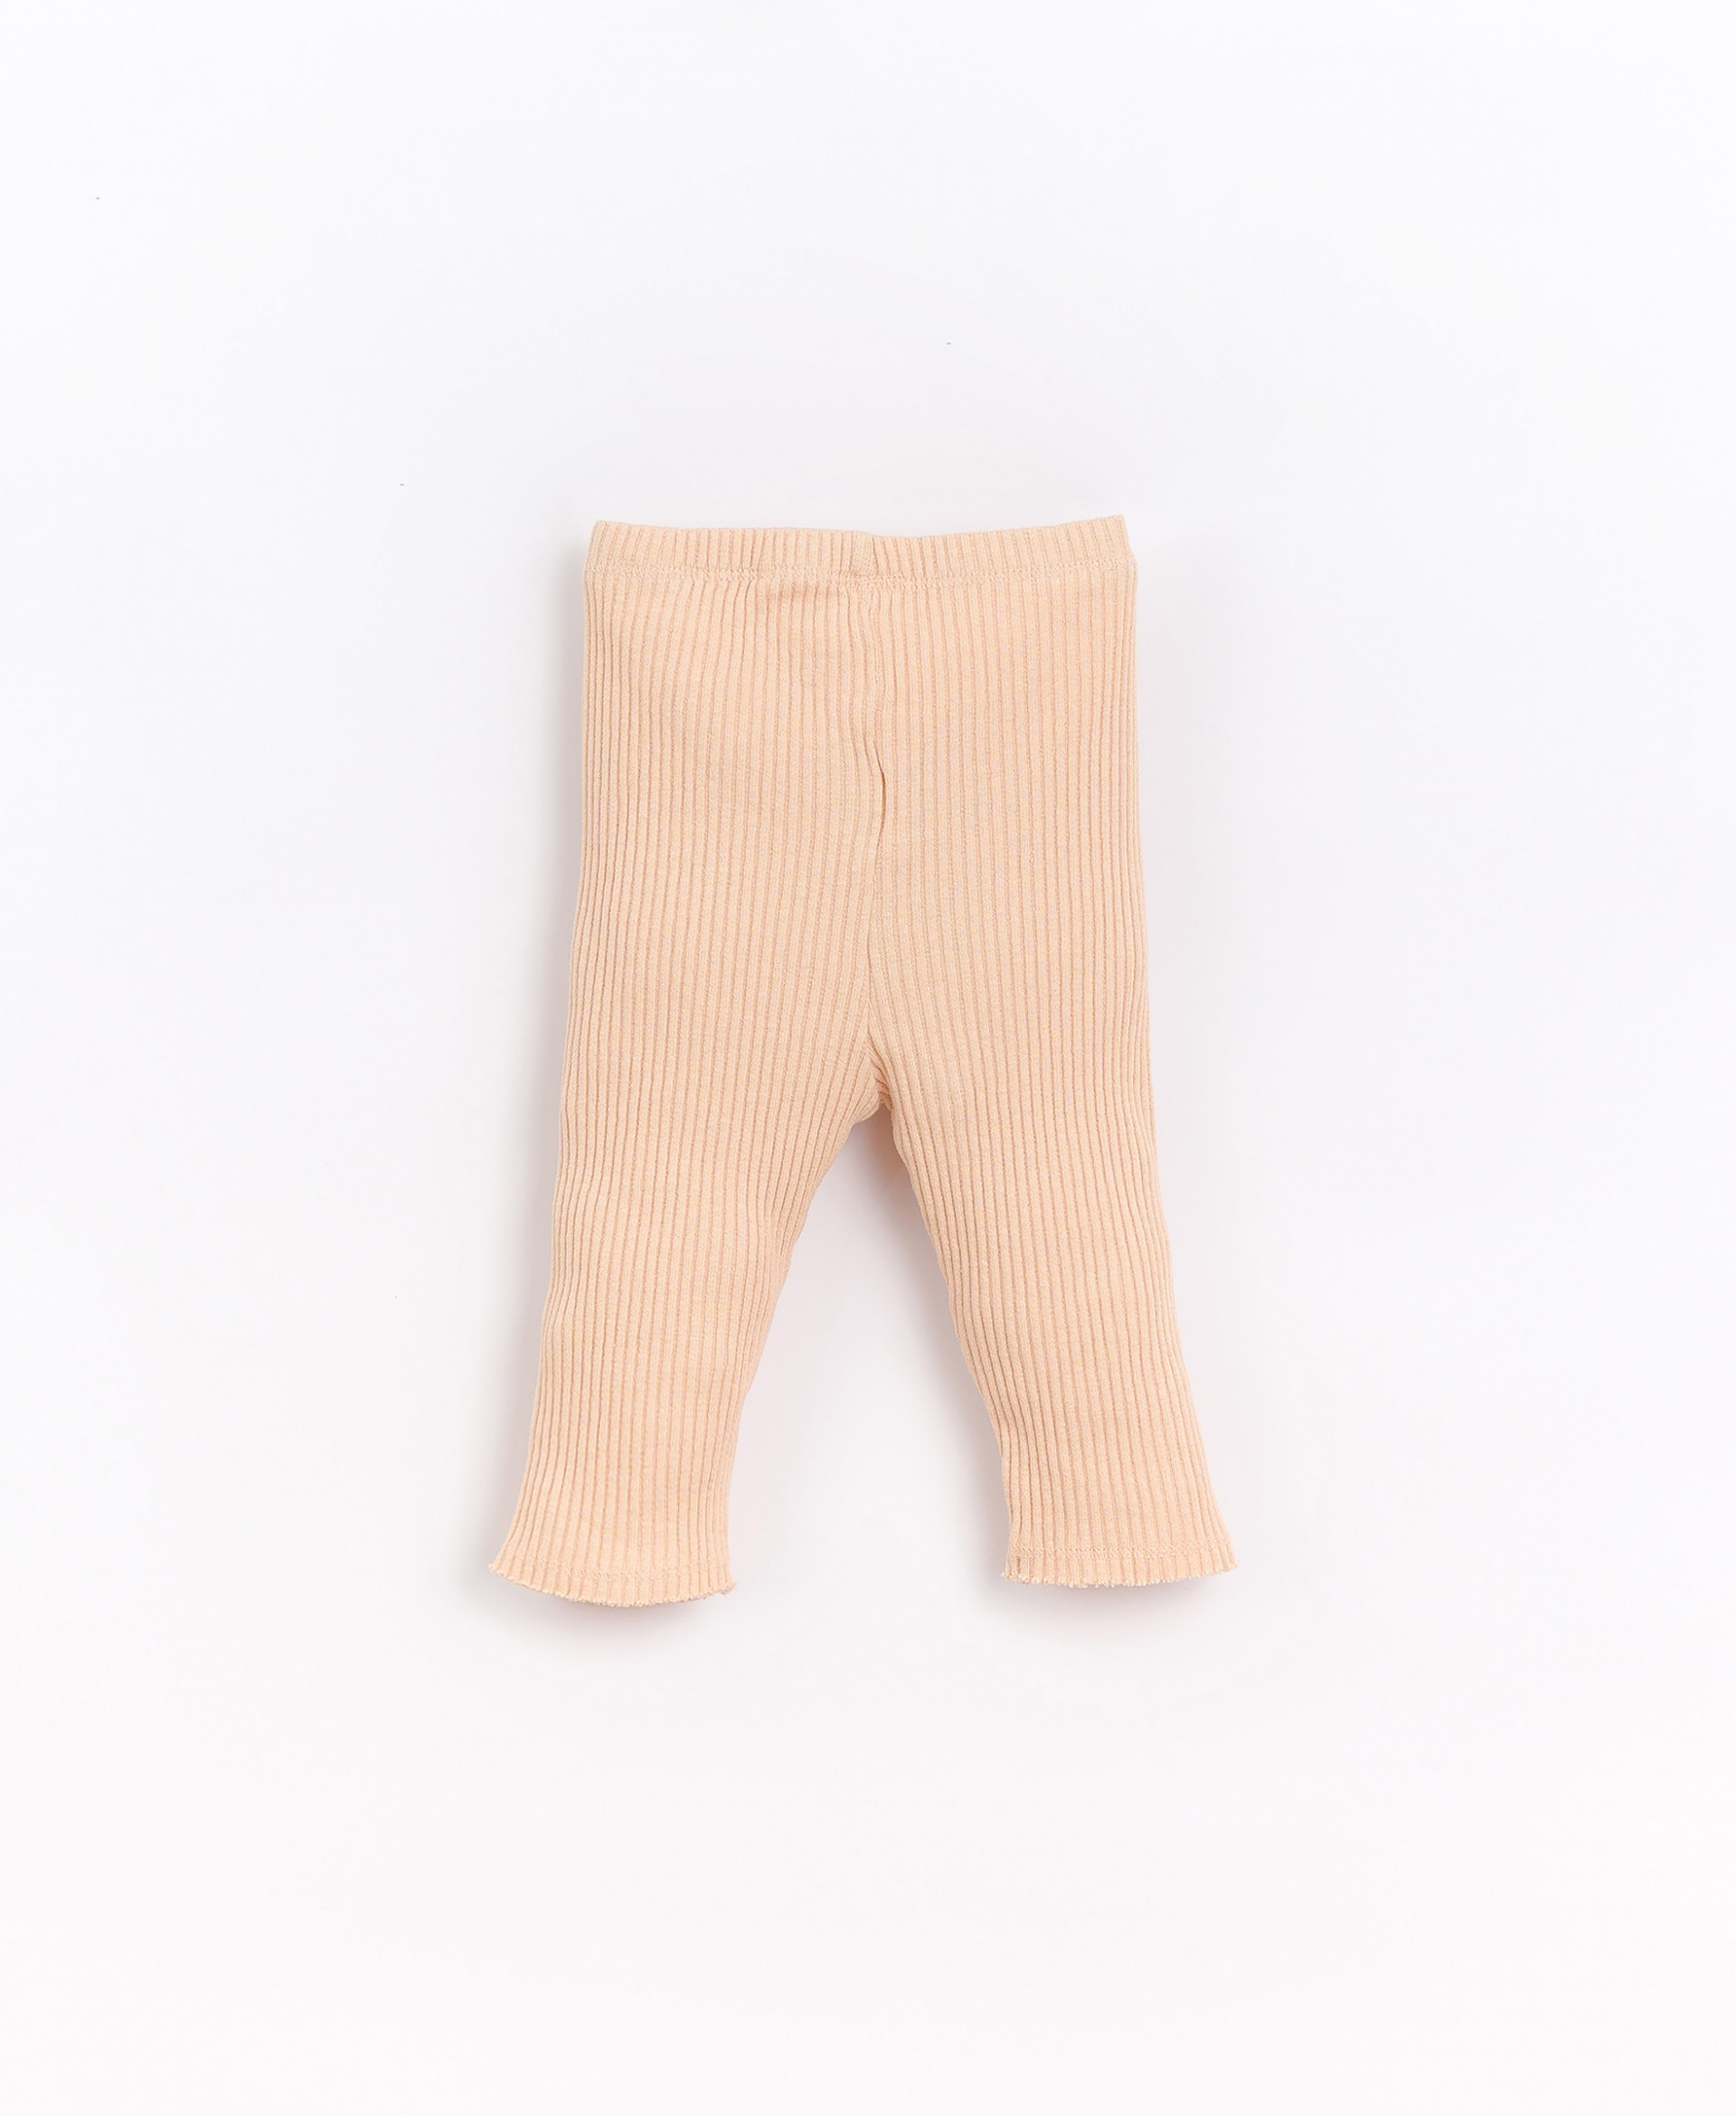 Ribbed leggings with decorative button | Basketry